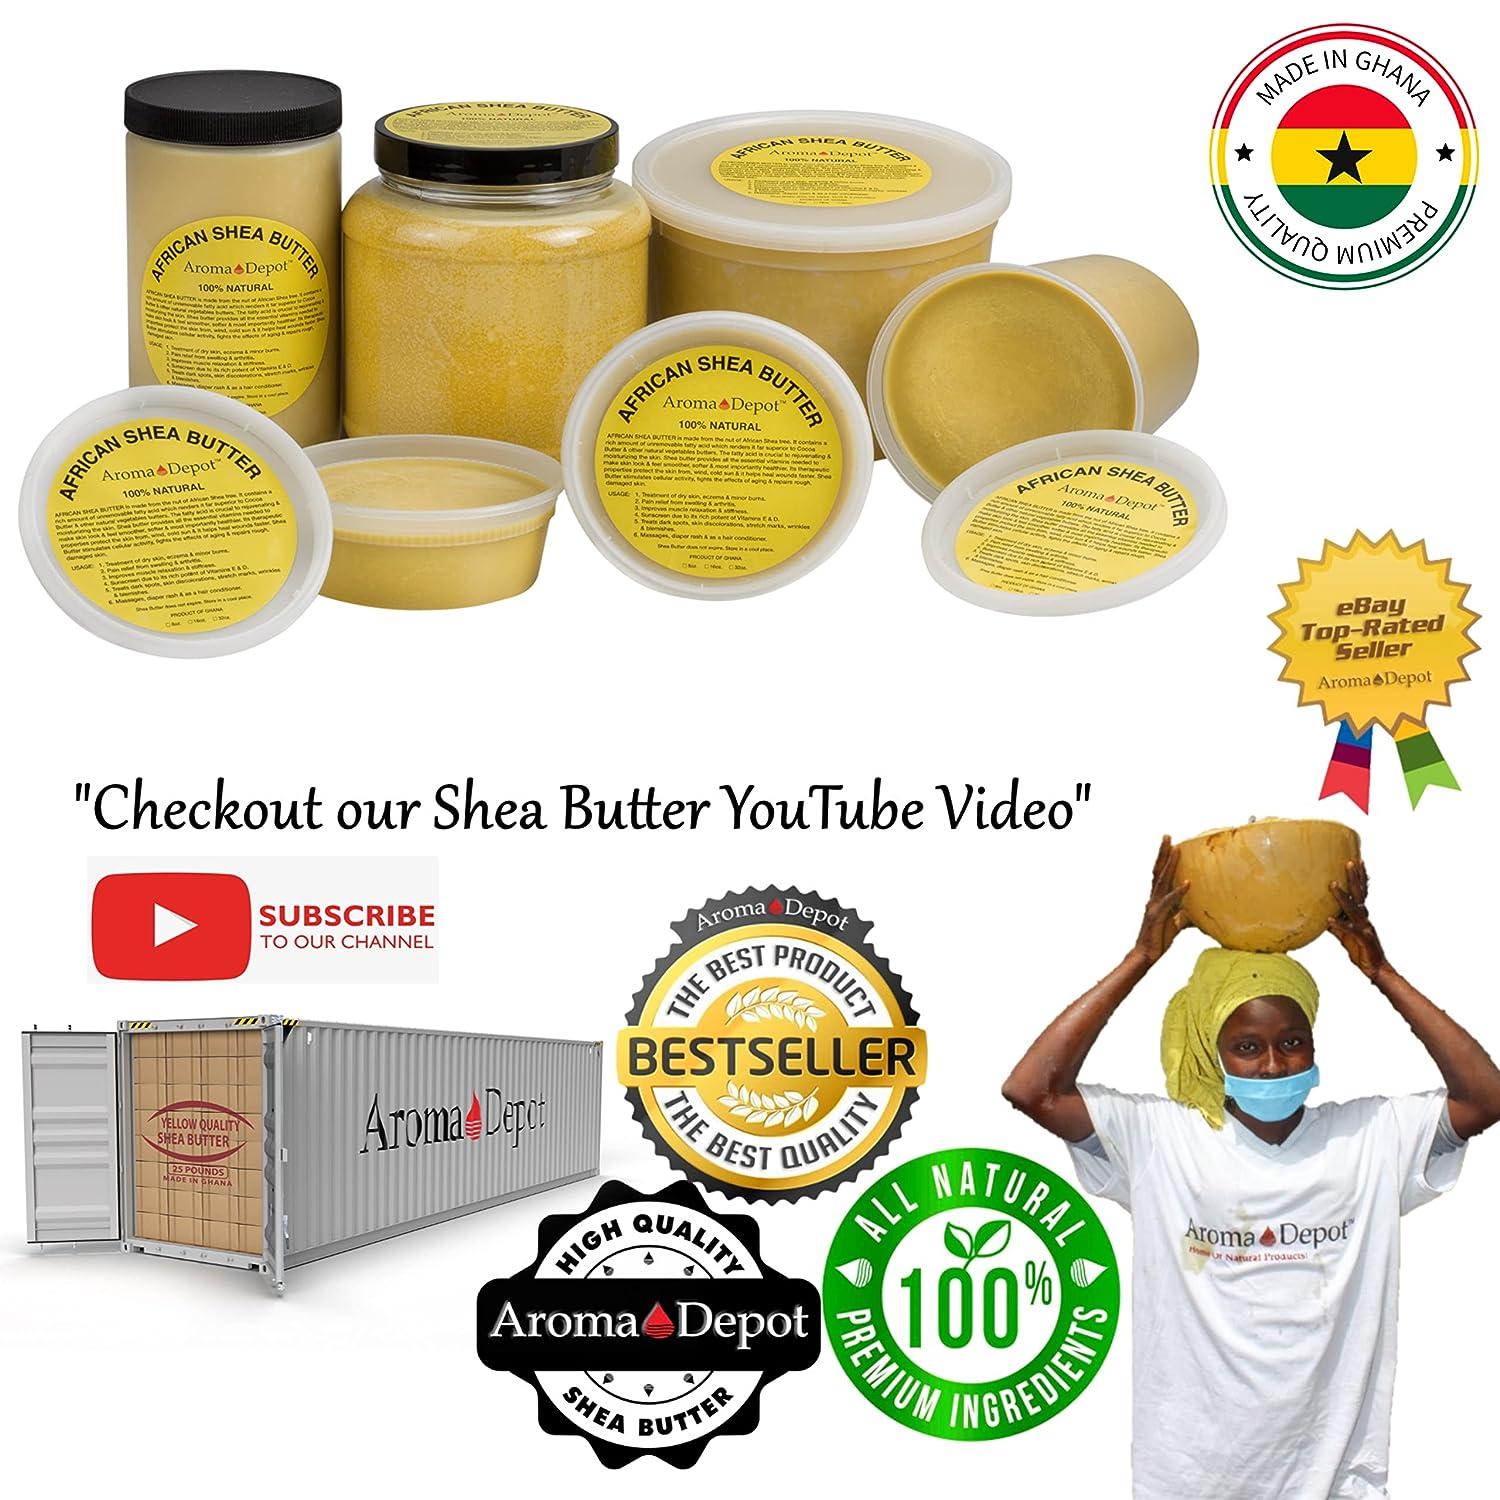  100% Pure African Shea Butter, 16 oz - For